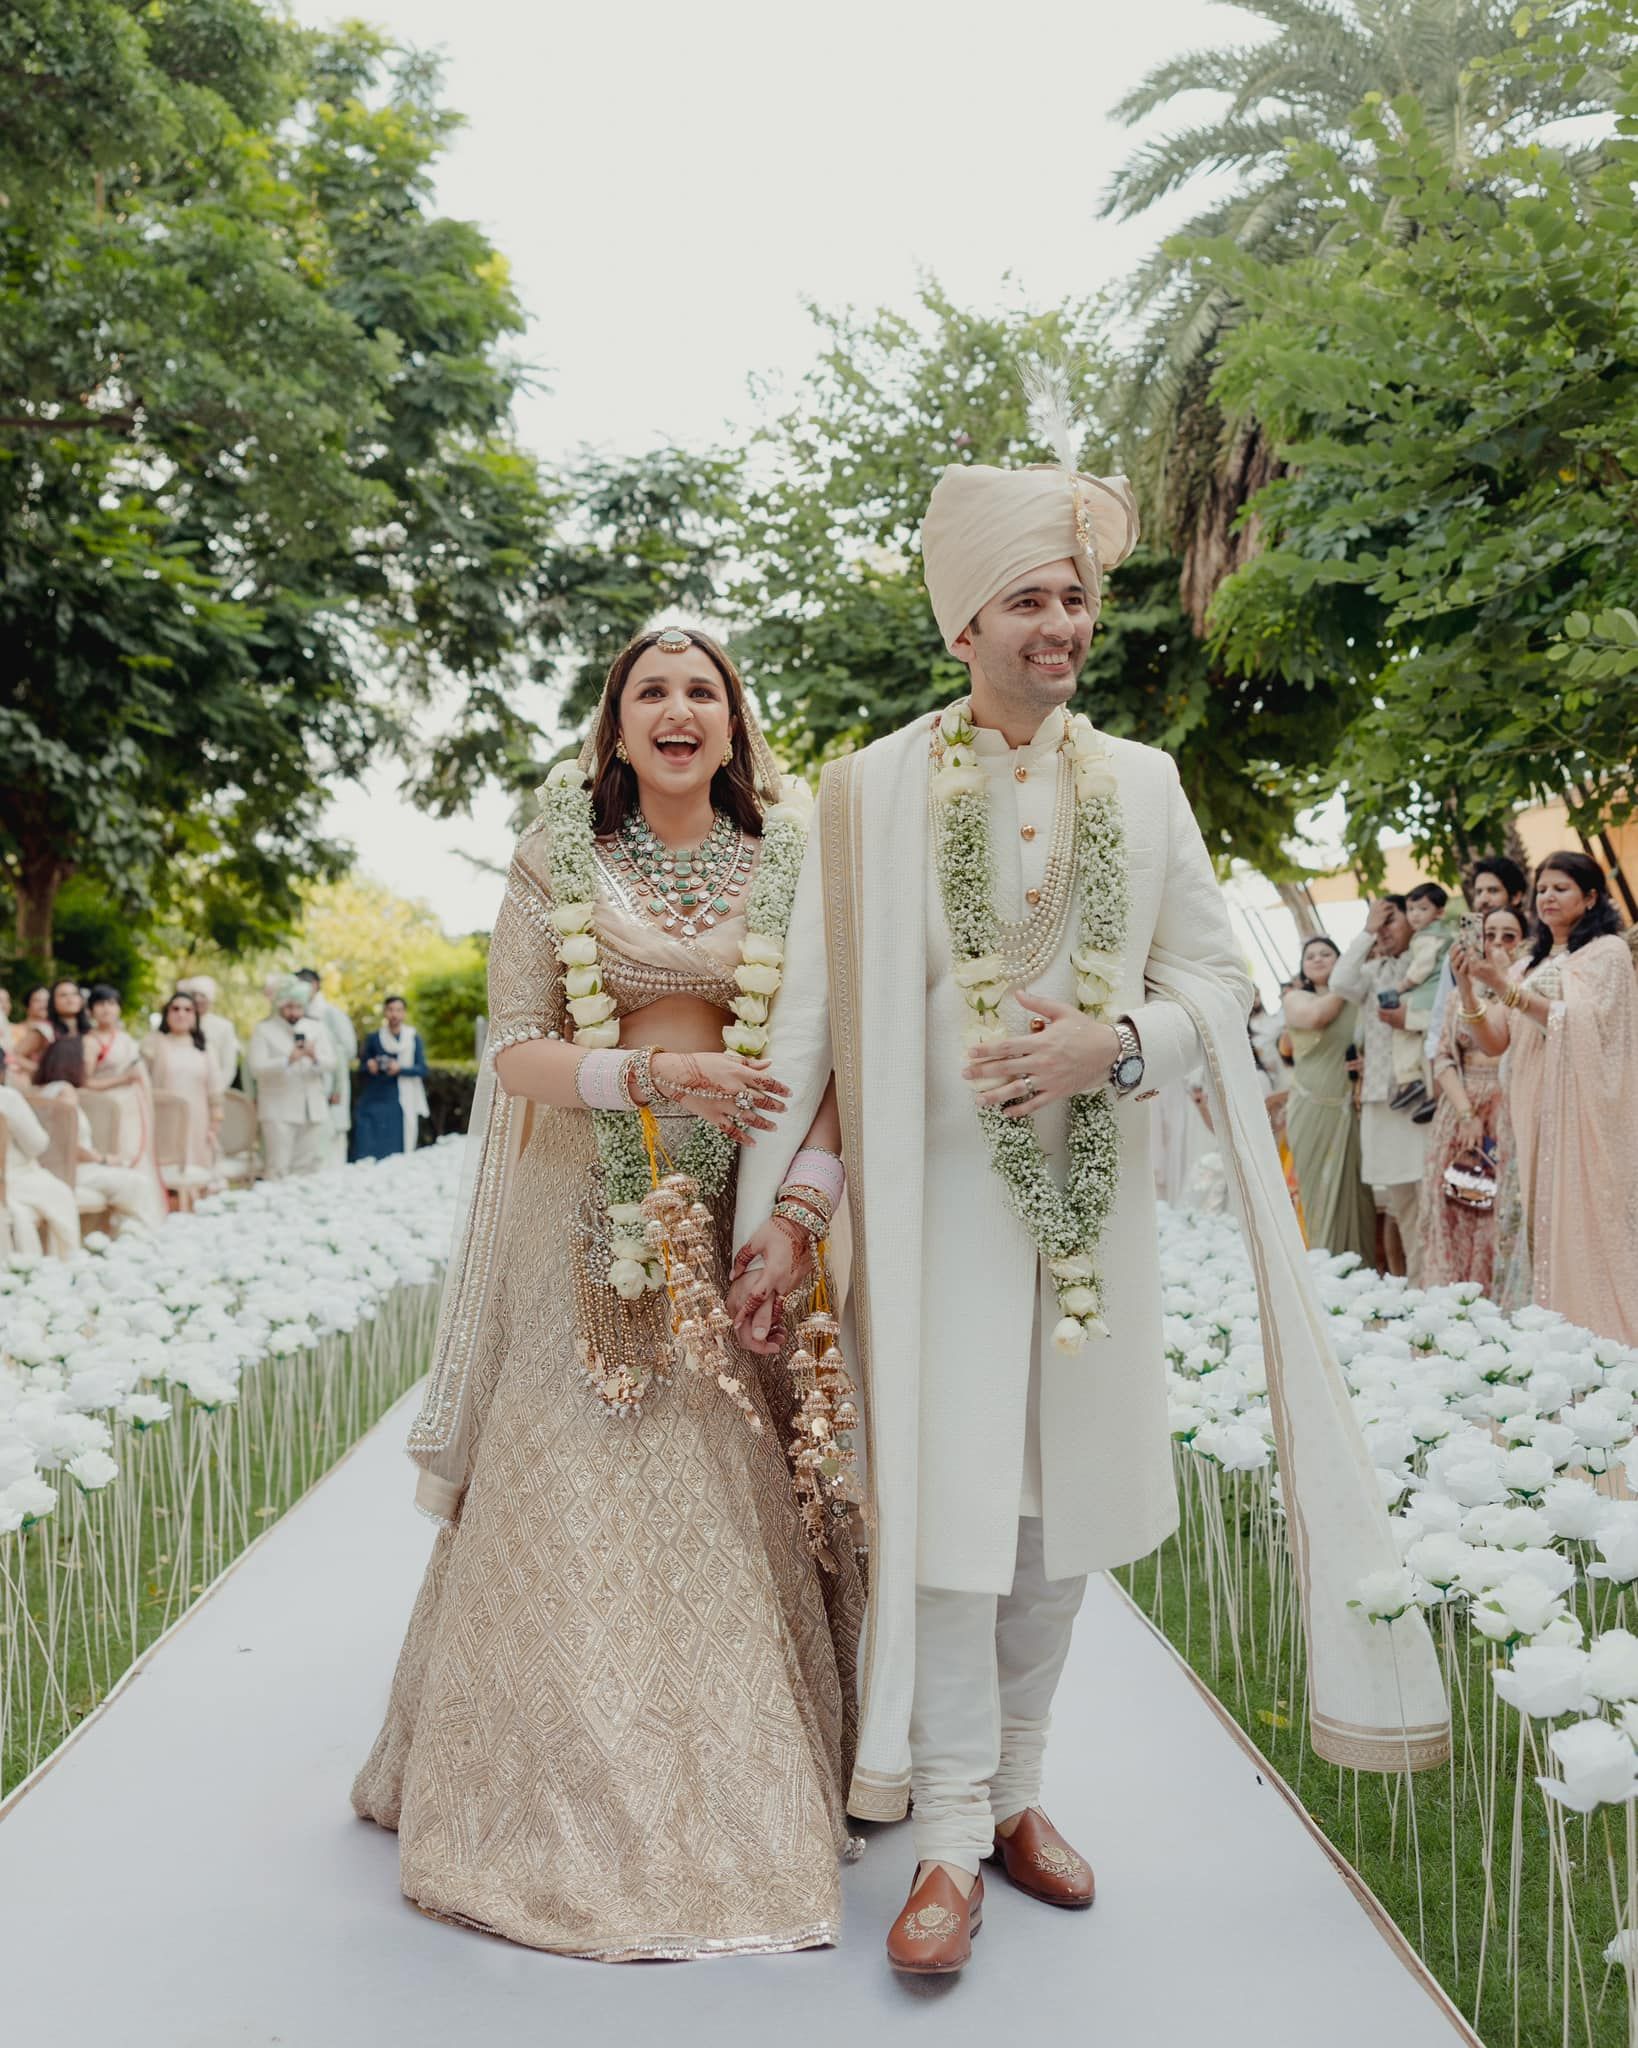 The pictures show the couple dressed for their day wedding in Udaipur — a blush lehenga for the bride and cream sherwani for the groom. 